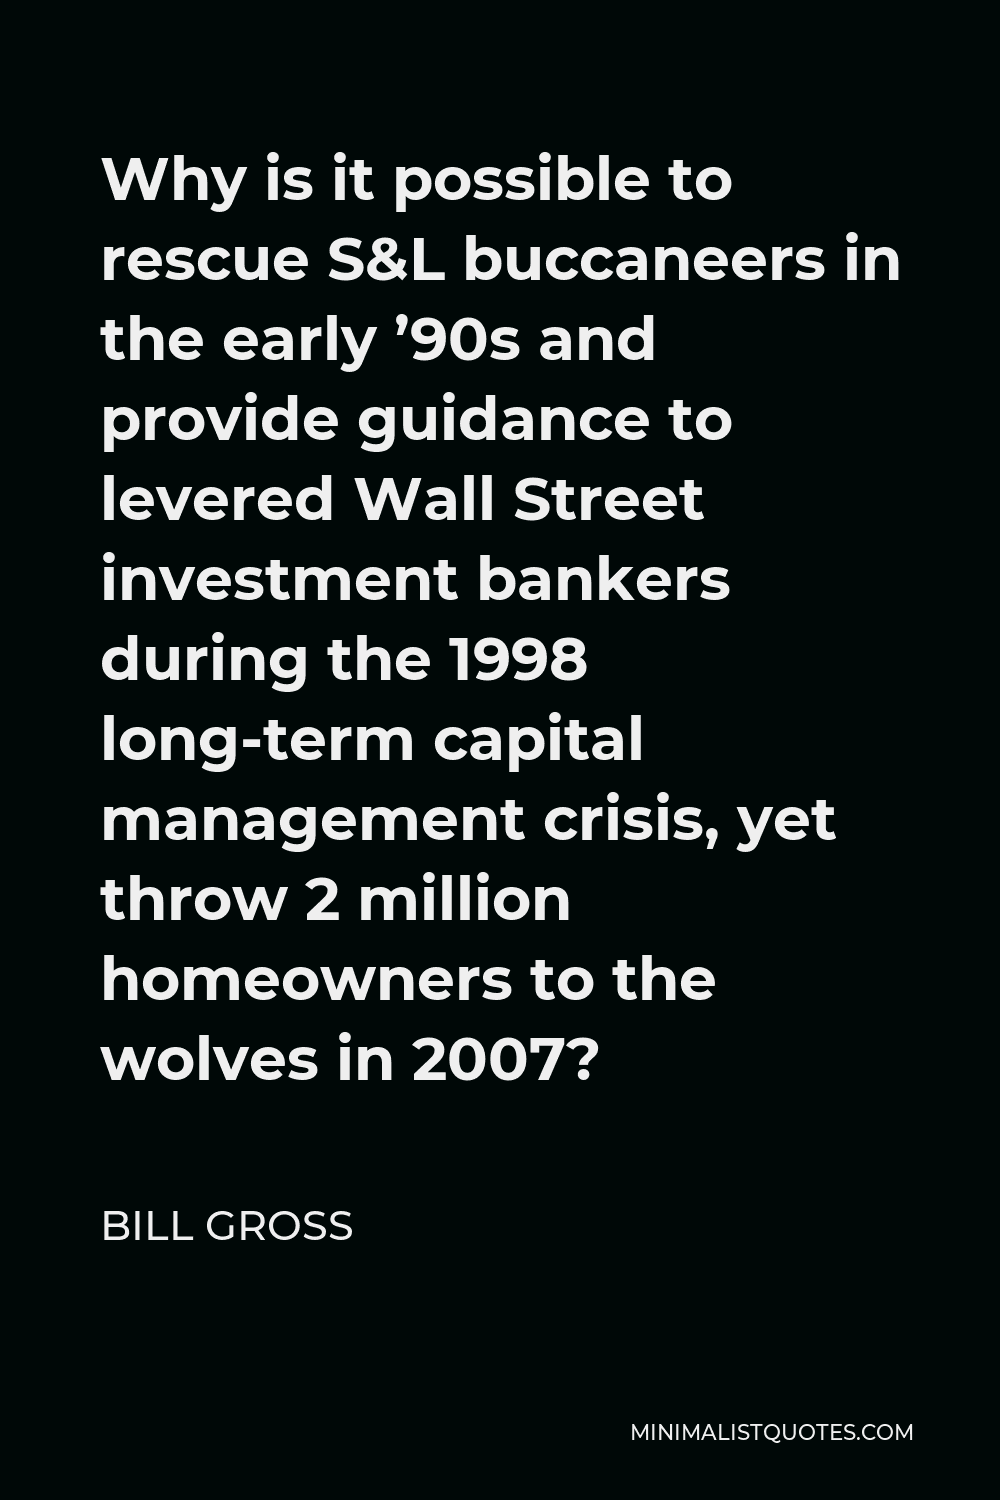 Bill Gross Quote - Why is it possible to rescue S&L buccaneers in the early ’90s and provide guidance to levered Wall Street investment bankers during the 1998 long-term capital management crisis, yet throw 2 million homeowners to the wolves in 2007?